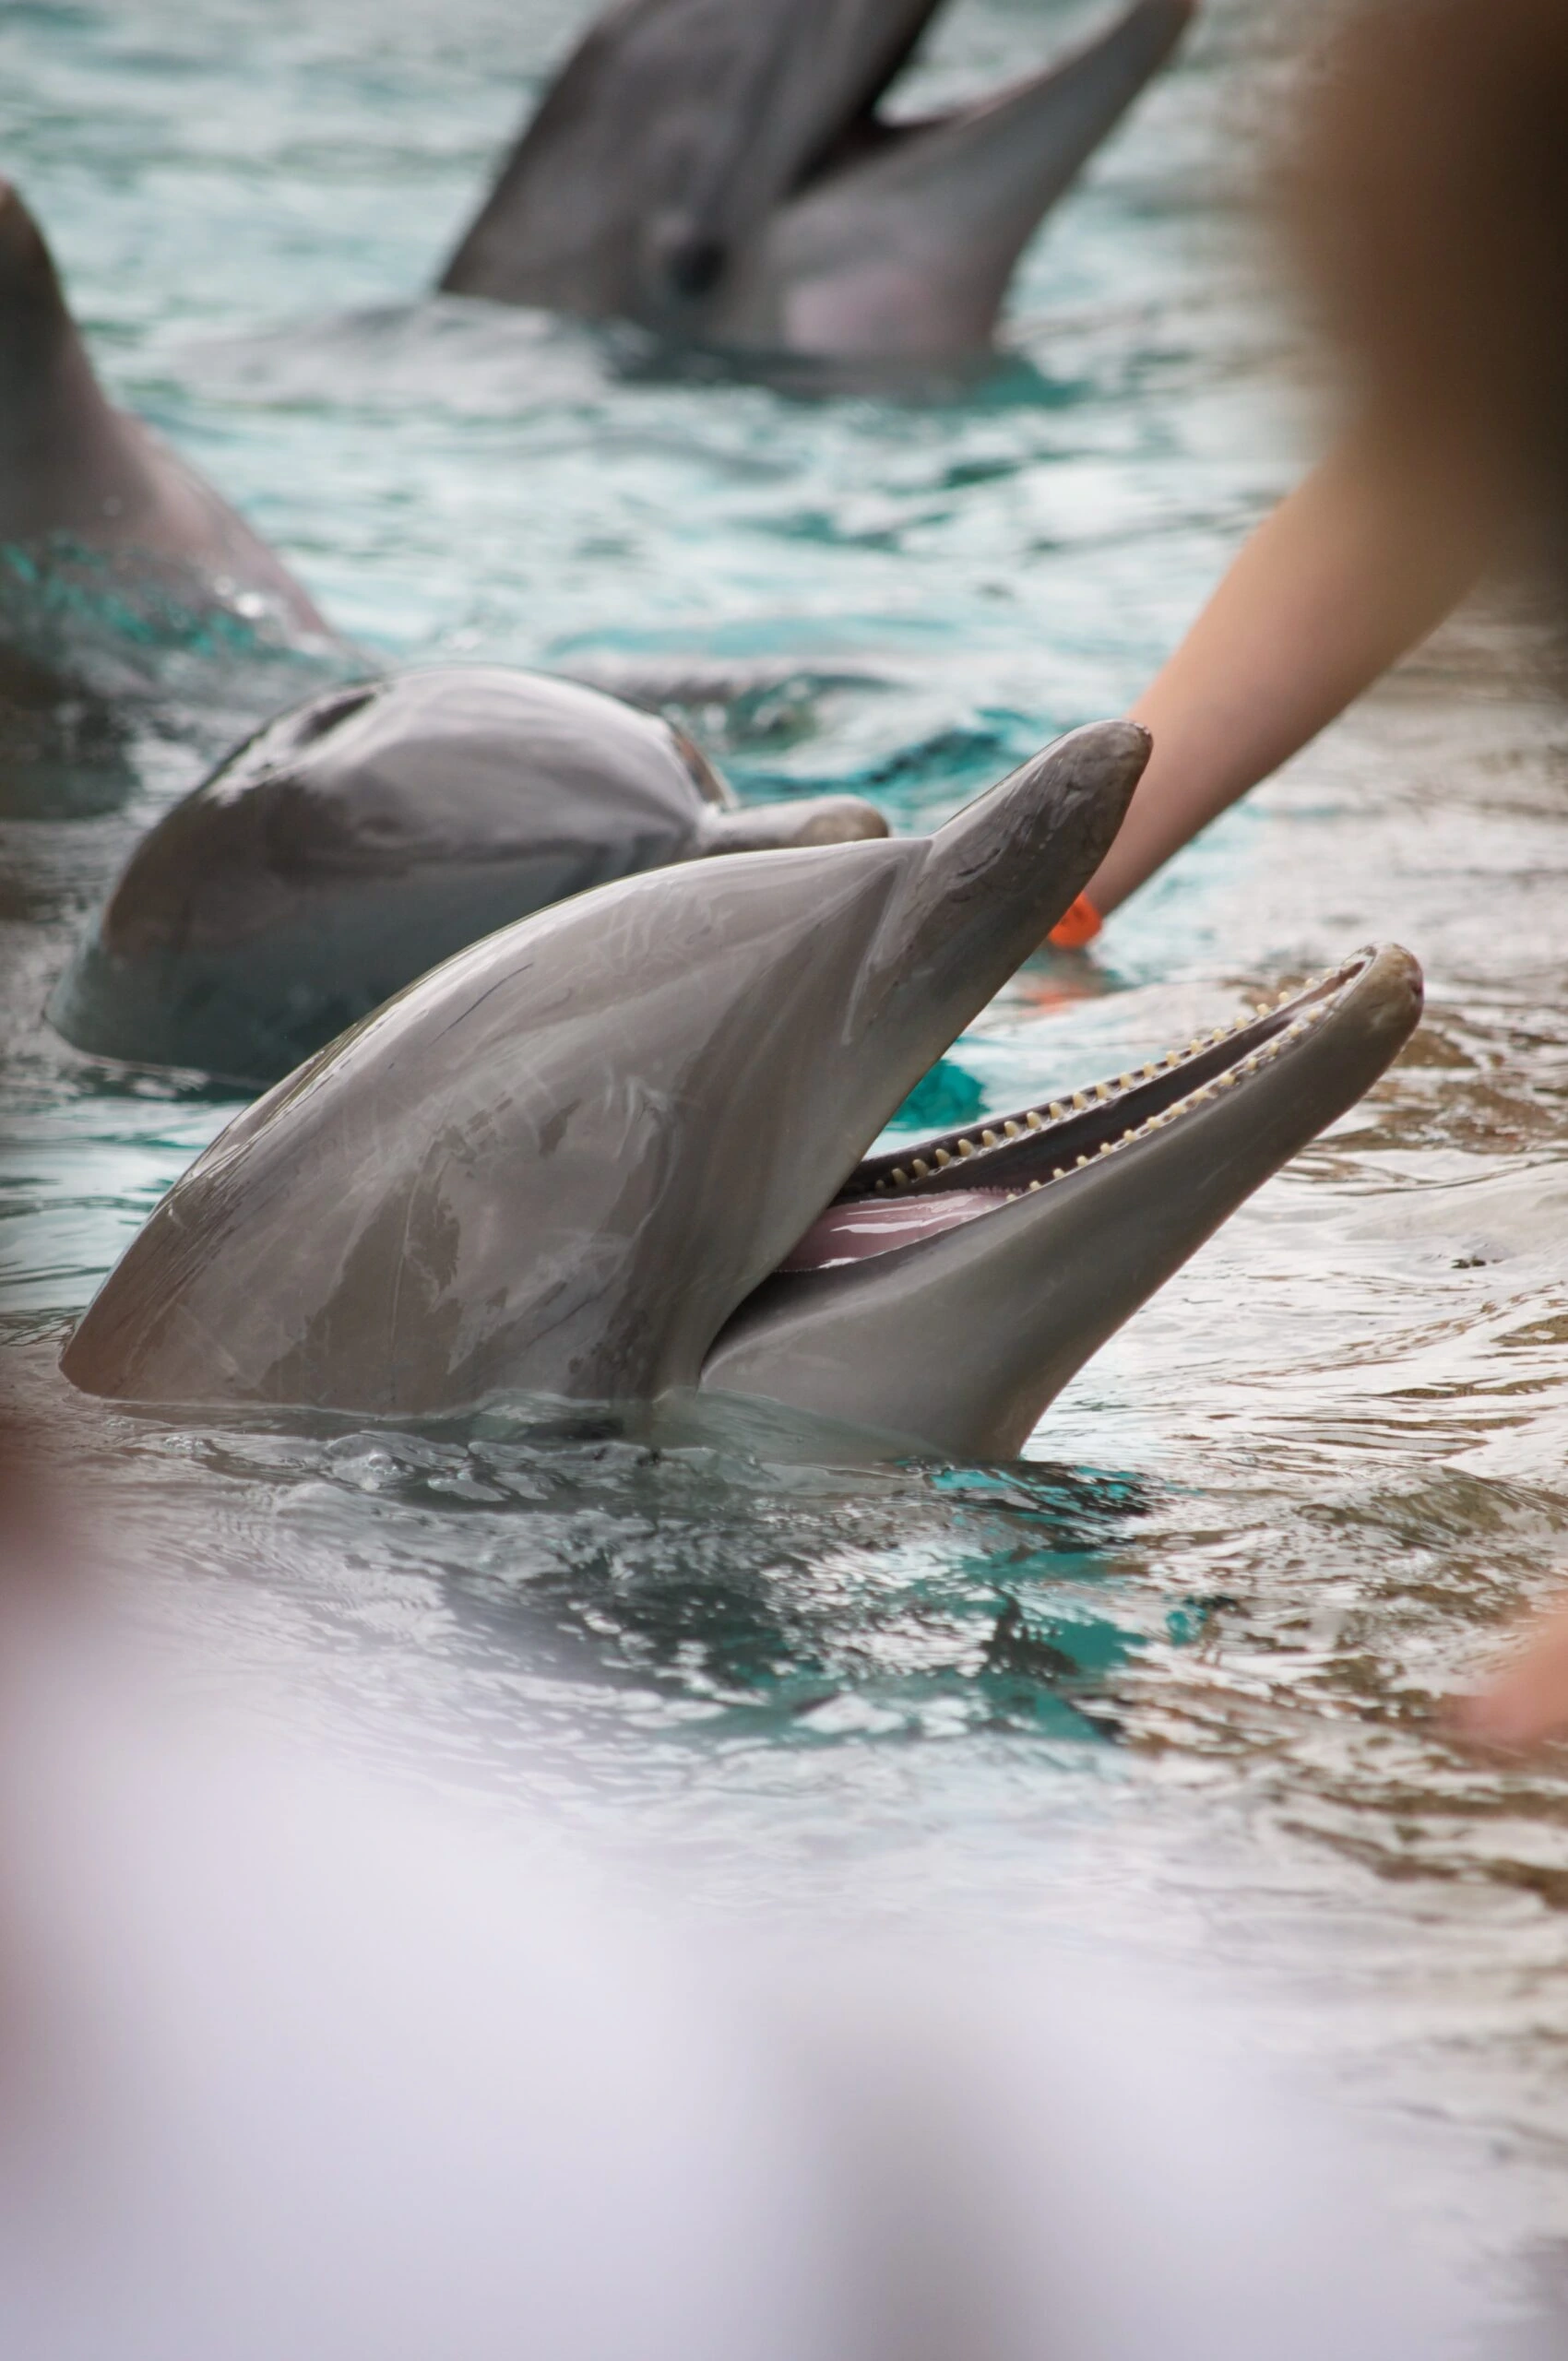 dan-dennis-Dolphins rising to surface for human touch-unsplash